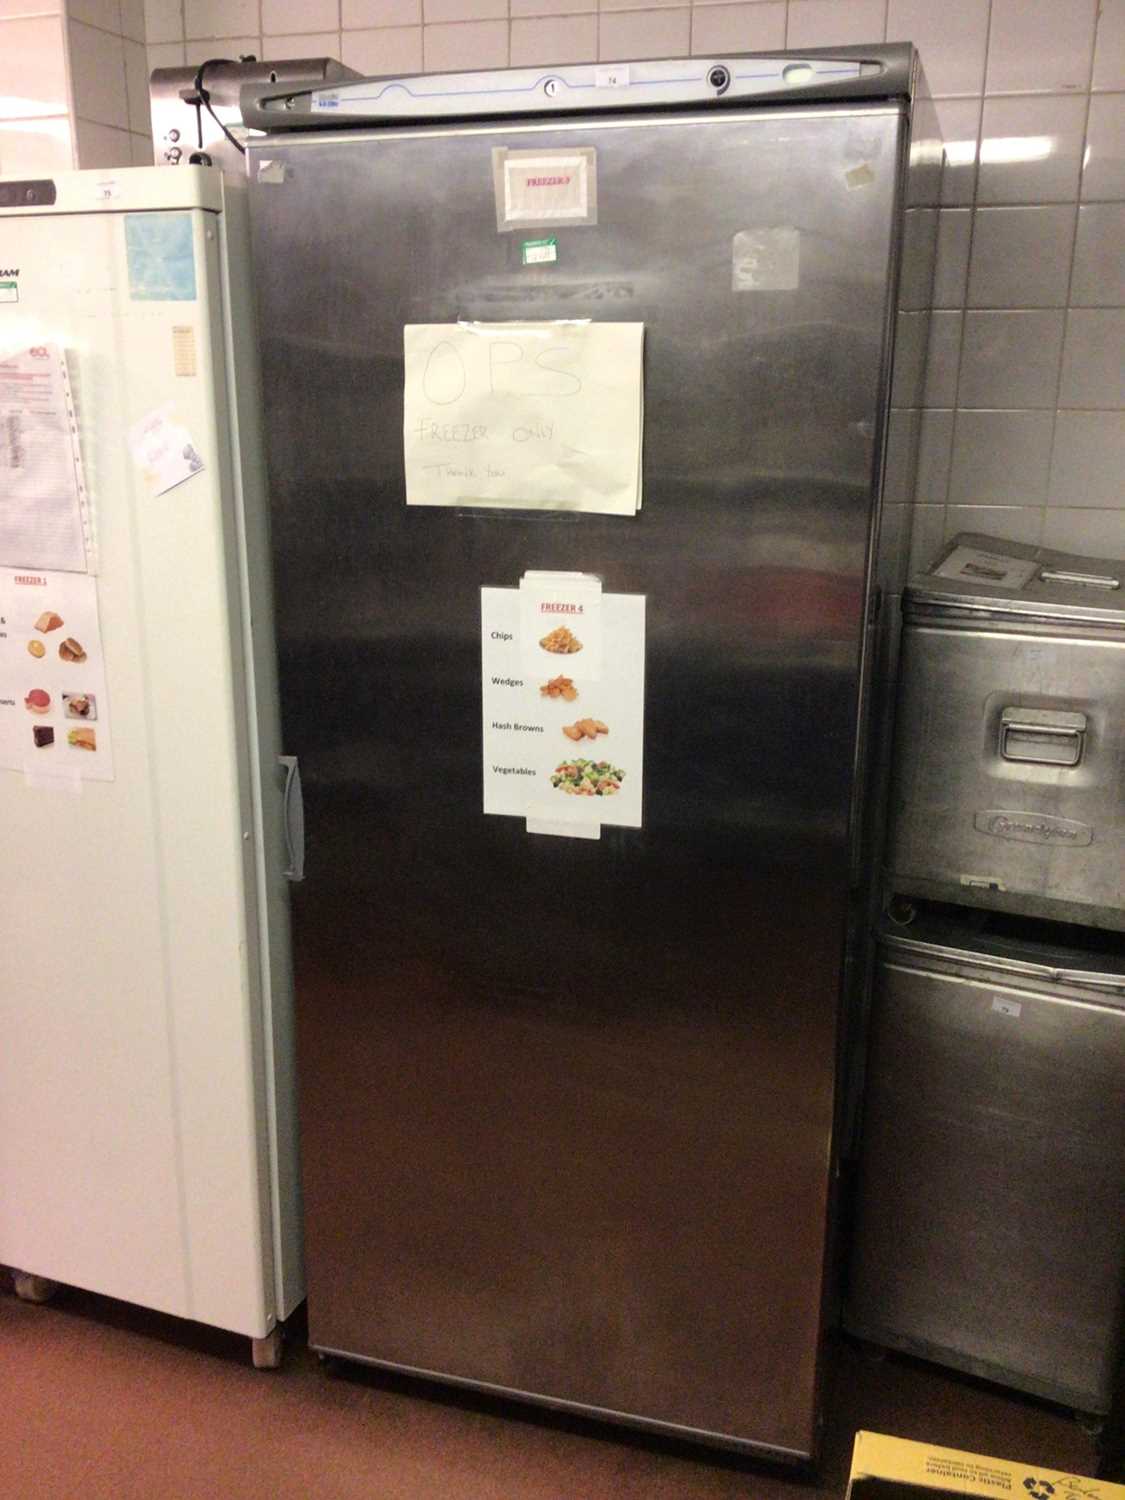 Lot 74 - A Mondial Elite stainless steel upright freezer, cable and plug, 770 mm wide x 730 mm deep x 1870 mm high